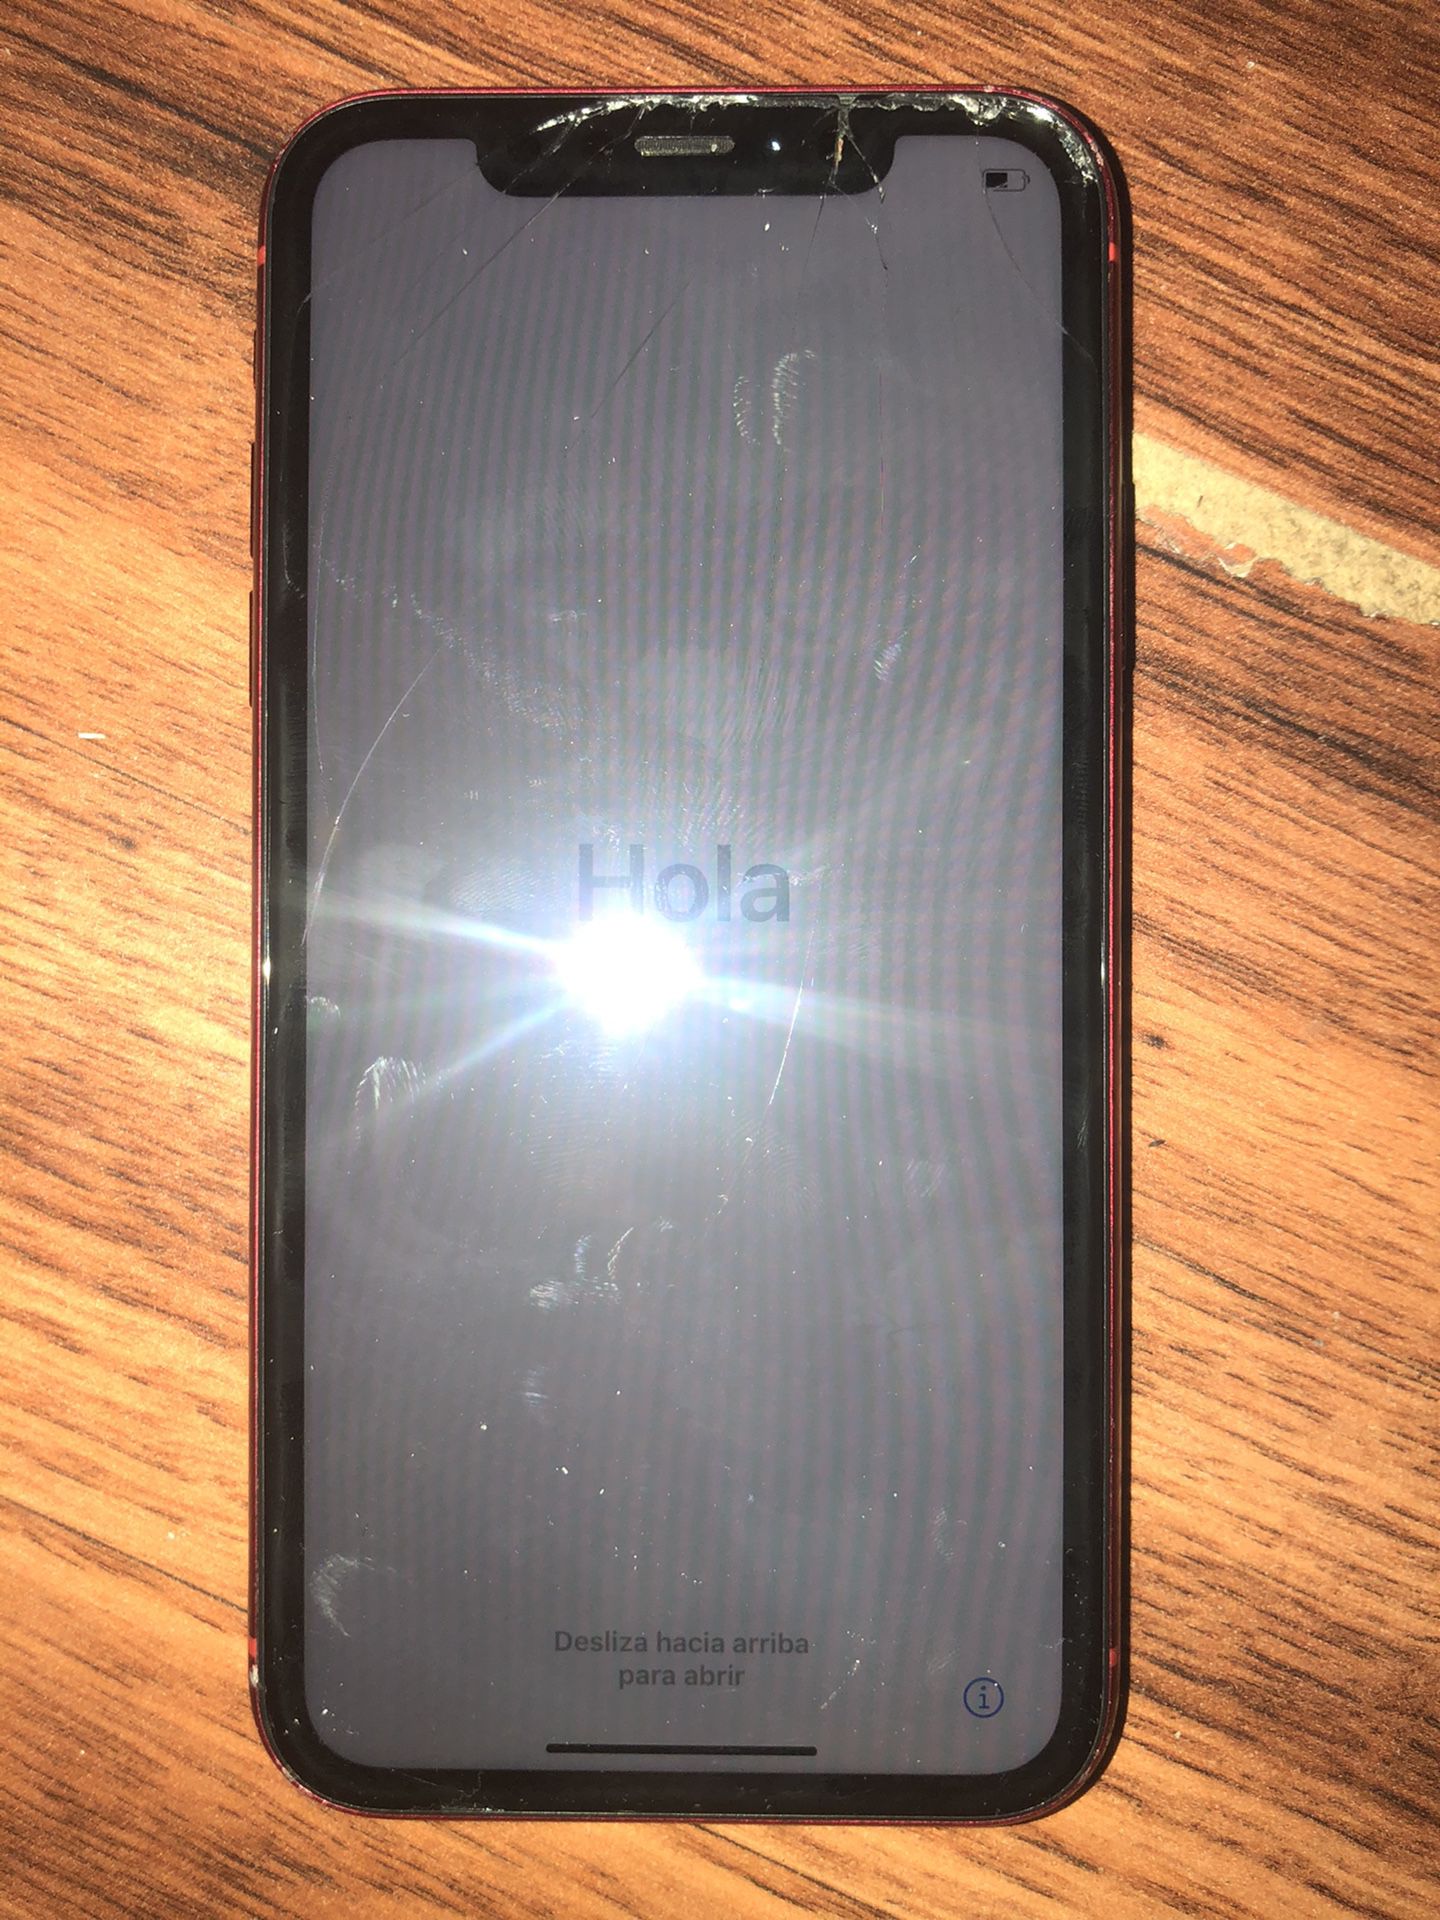 Iphone xr Has ACTIVATION LOCK